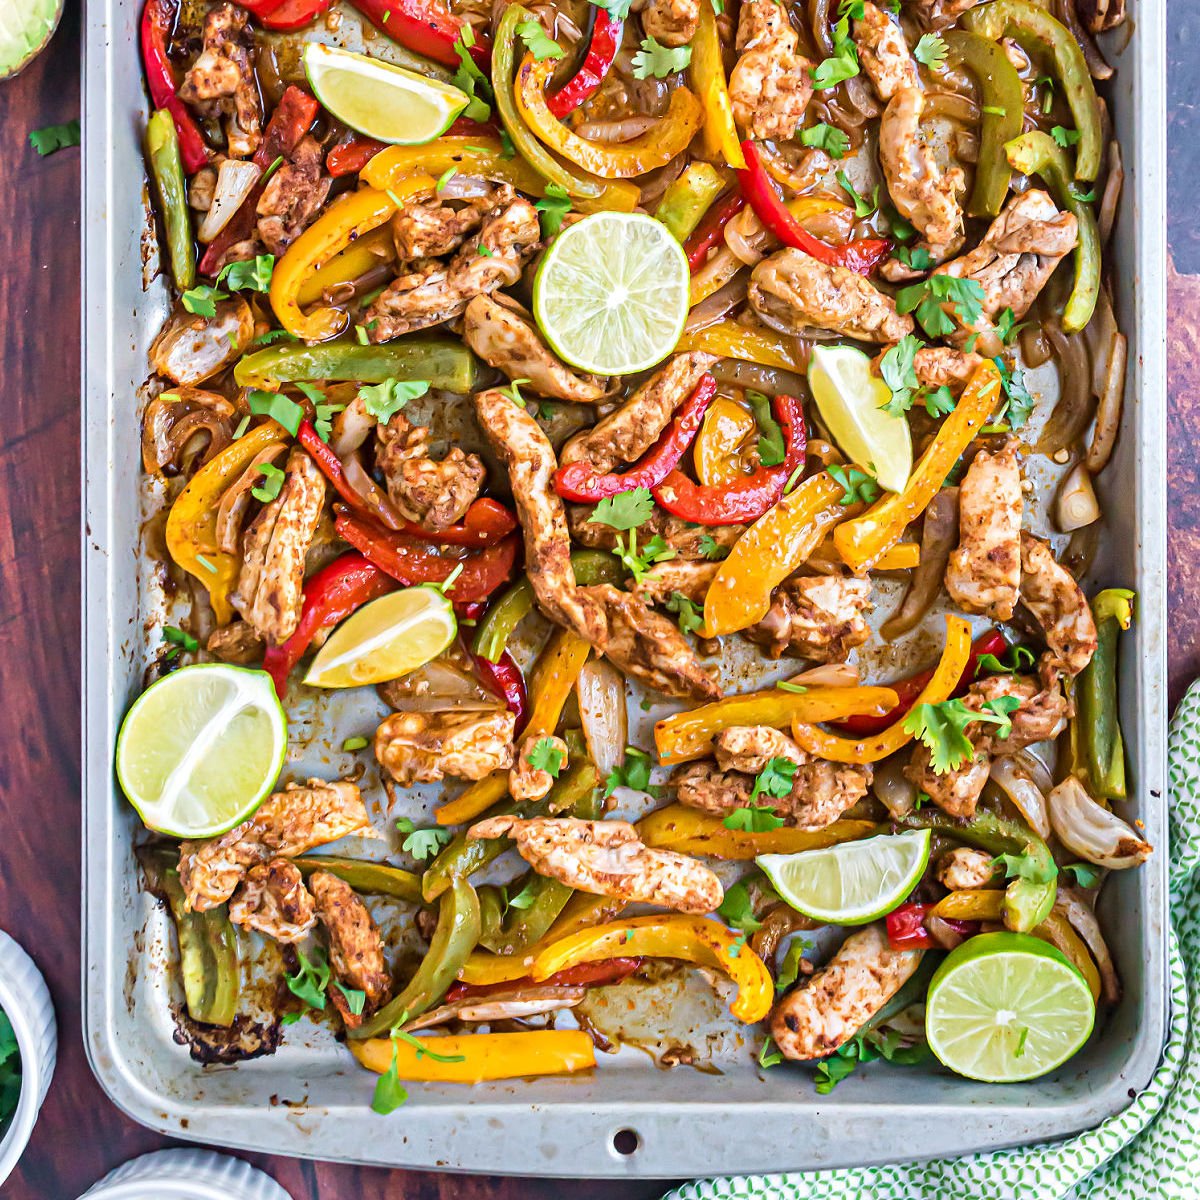 These easy skillet chicken fajitas are a lifesaver for busy